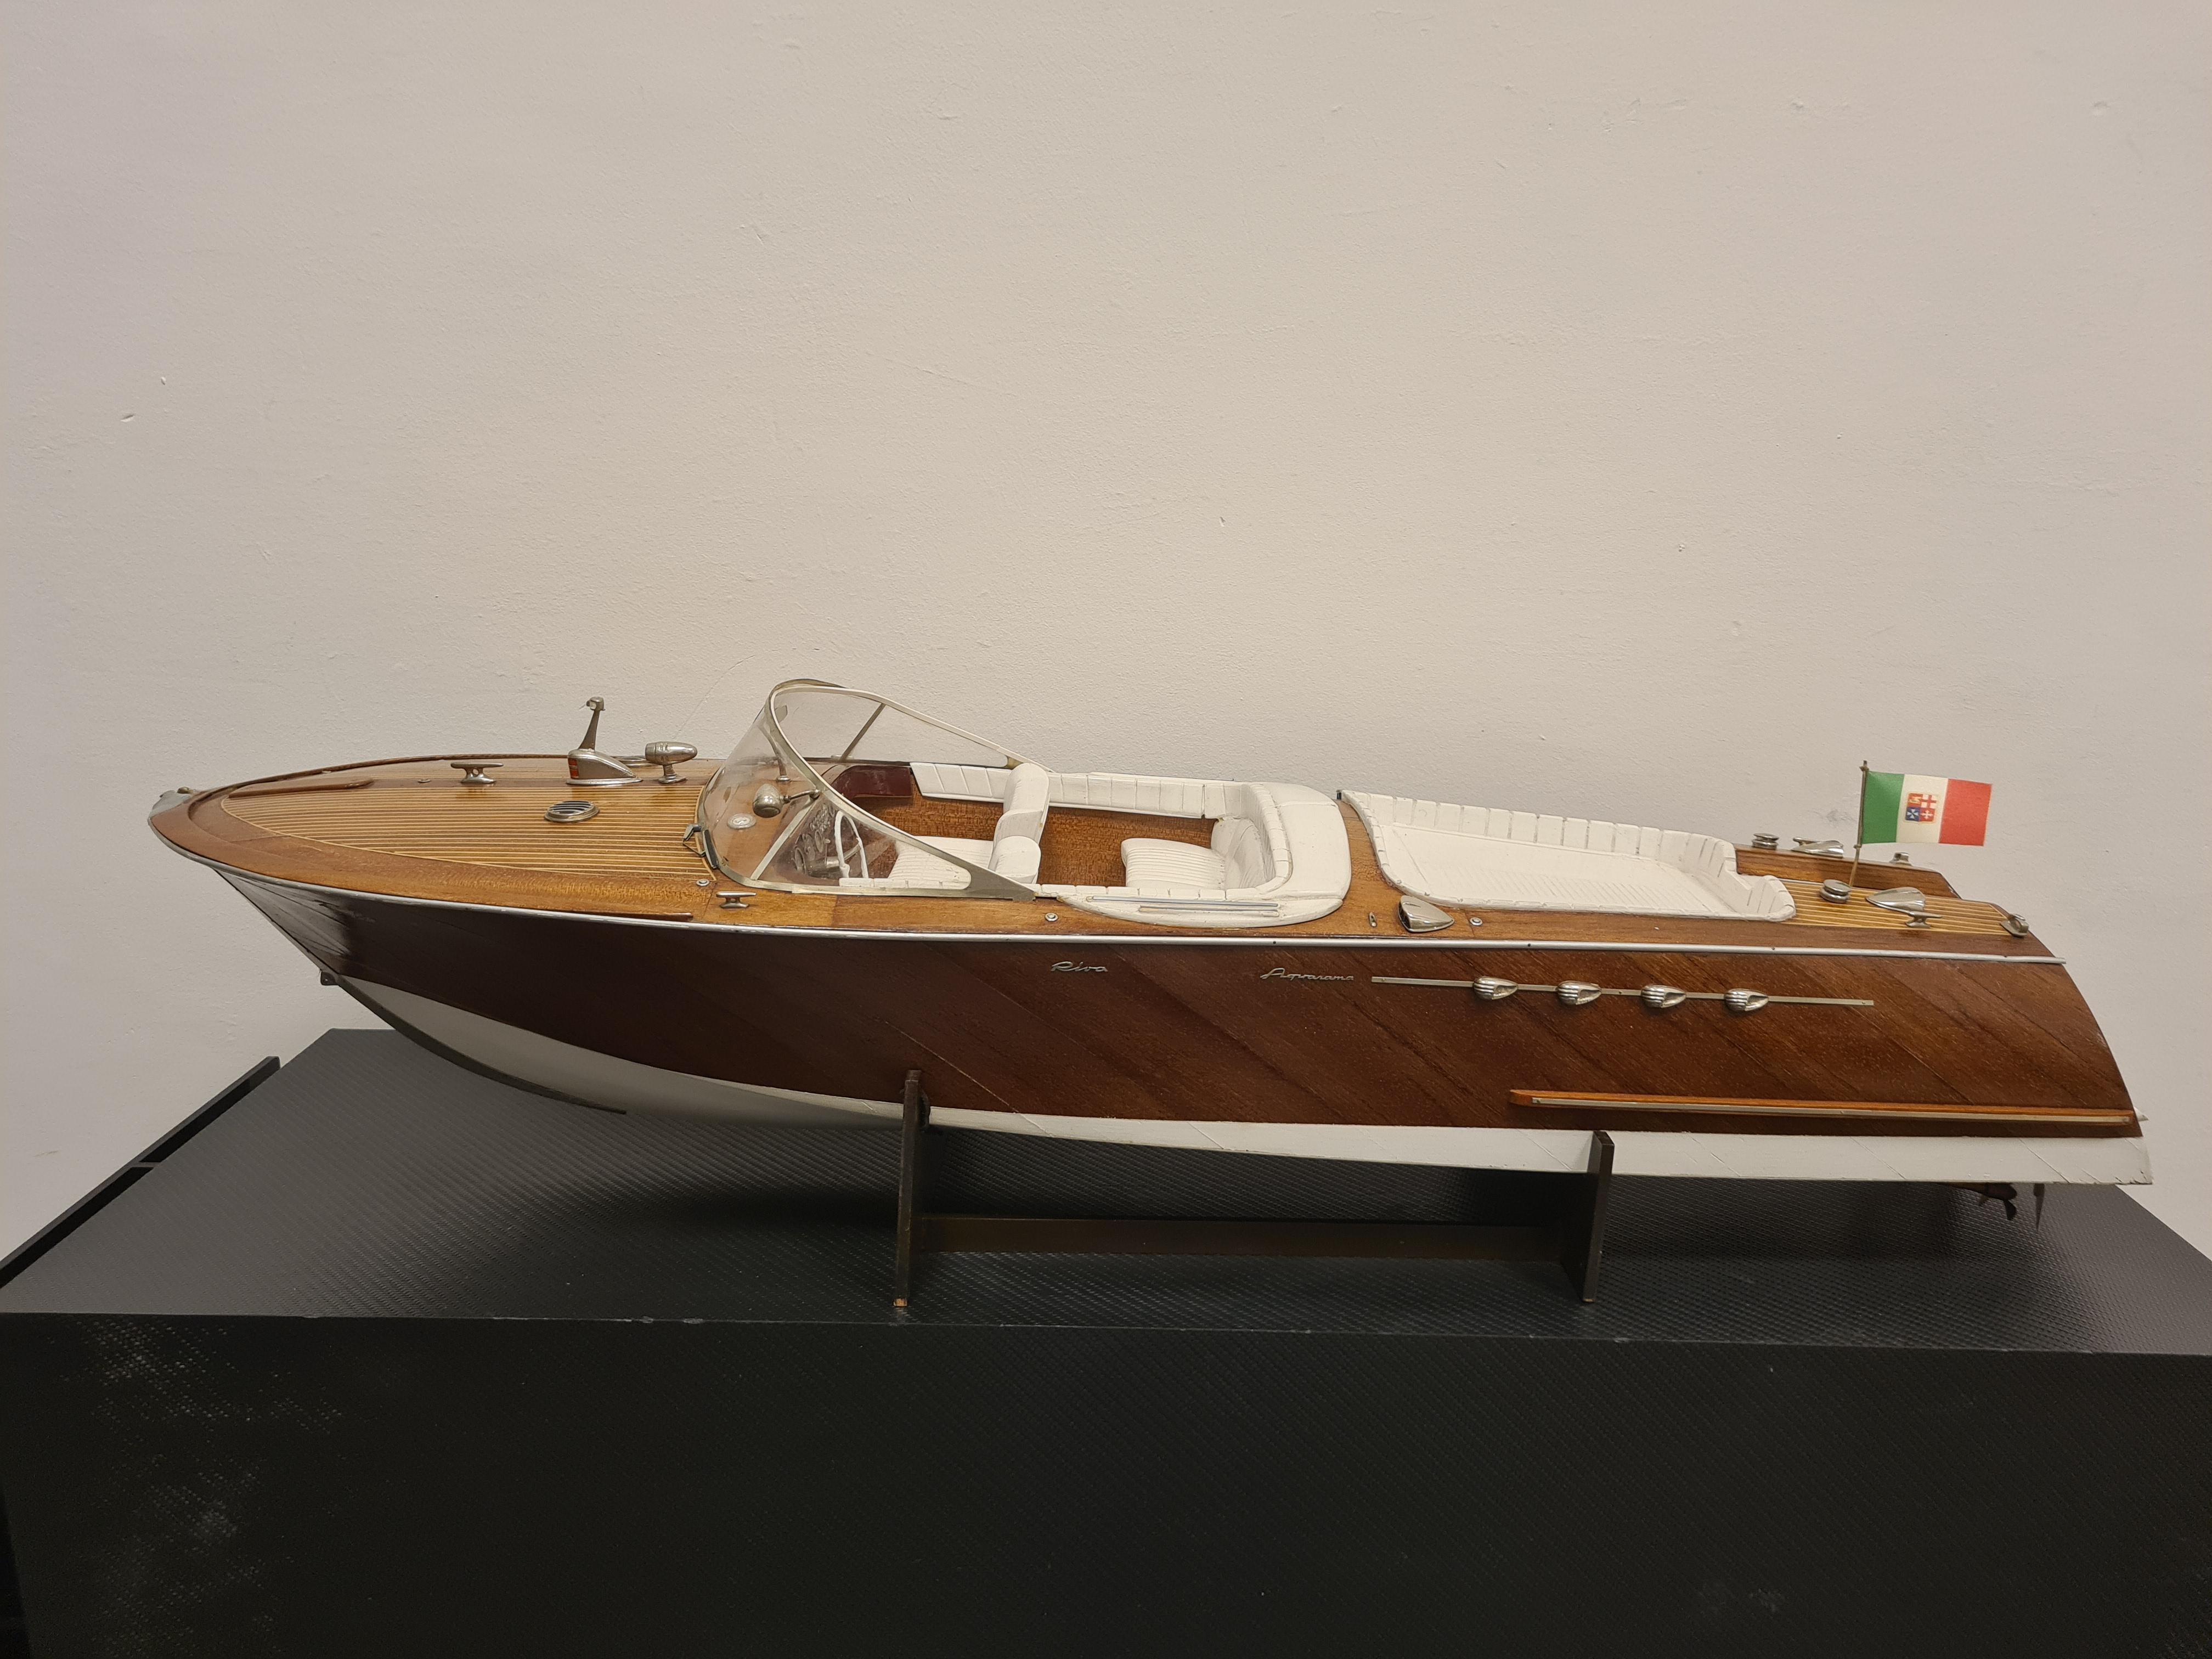 Scale model of the Riva Acquarama speedboat.

Detailed model of the iconic aquarama speedboat.

Made of fine materials such as mahogany and with chrome details.

This very faithful model is ideal for collectors or to decorate your rooms with a